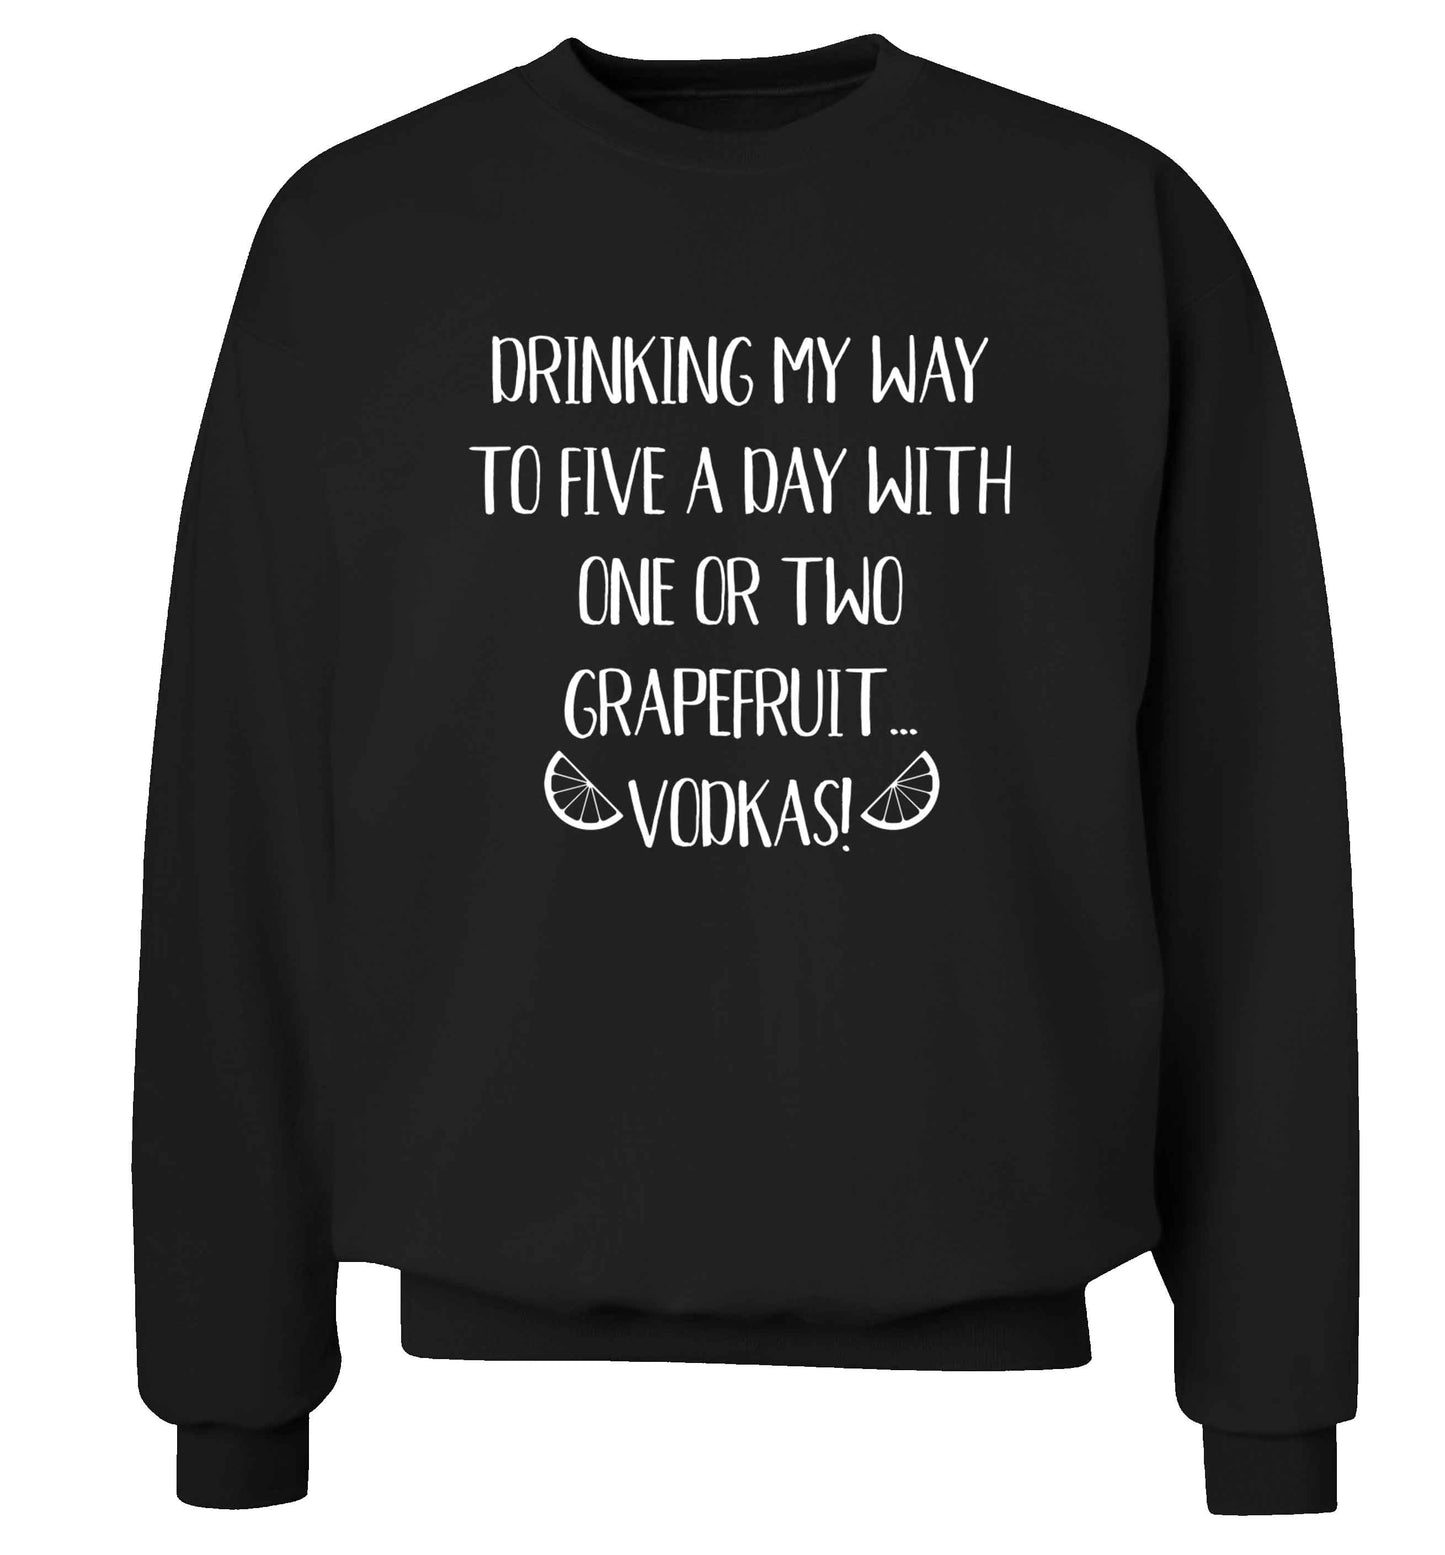 Drinking my way to five a day with one or two grapefruit vodkas Adult's unisex black Sweater 2XL